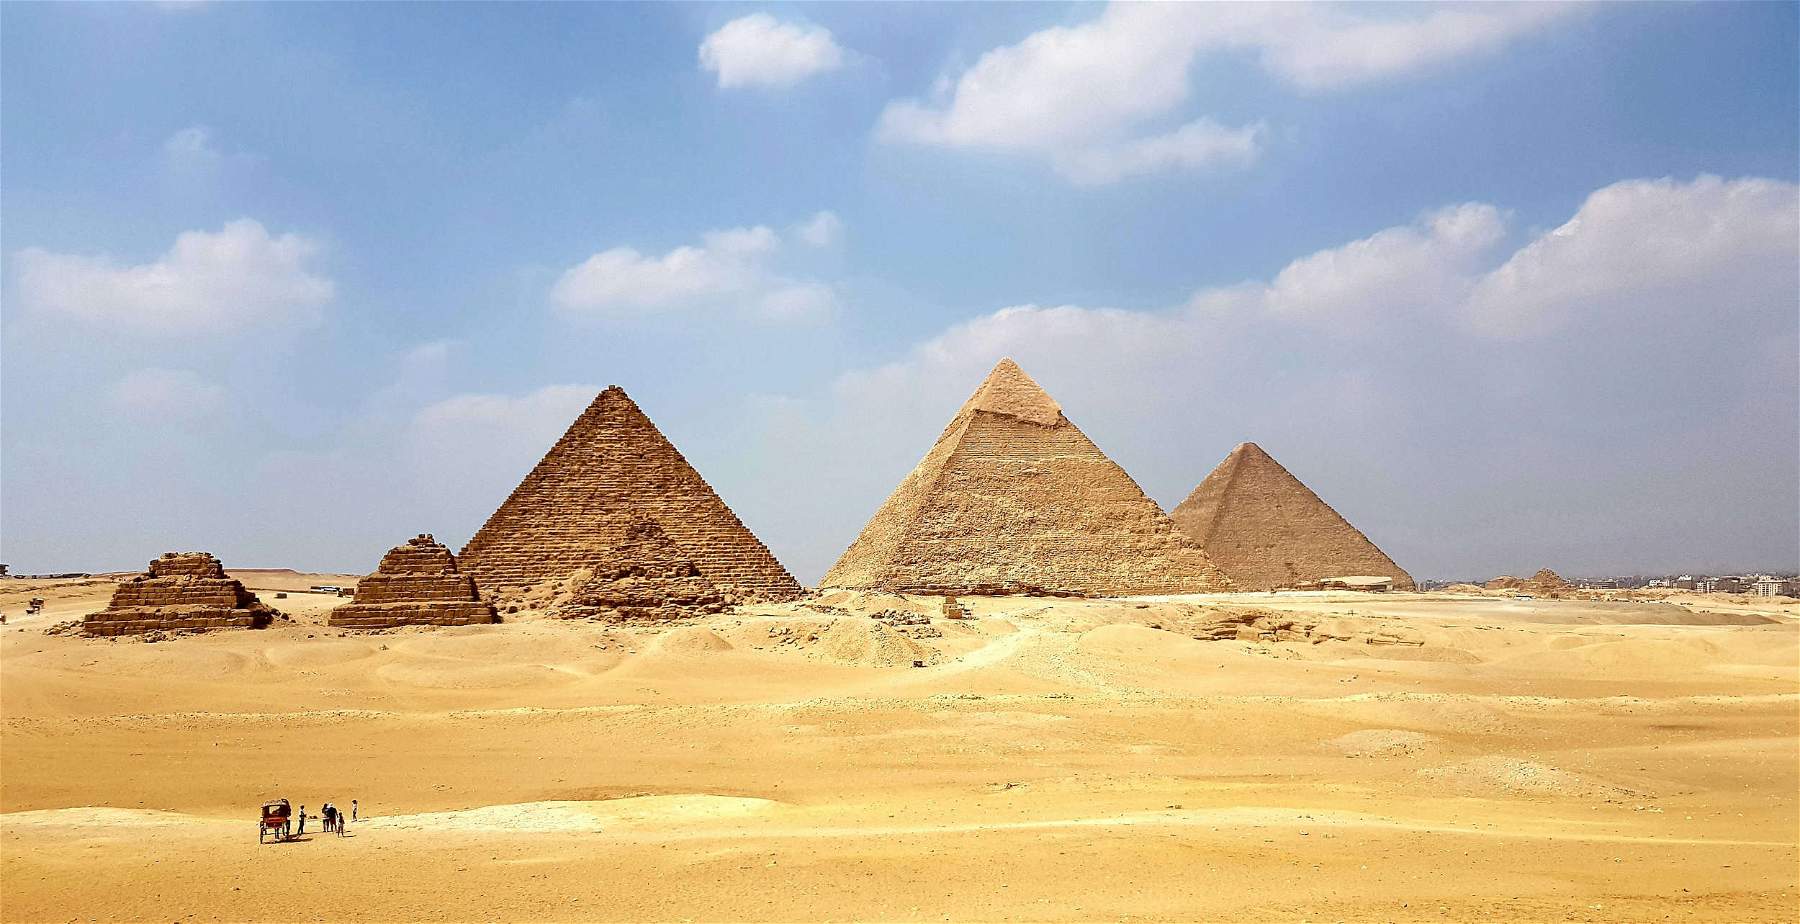 Mystery of the Pyramids solved? A new discovery may indicate how they were built